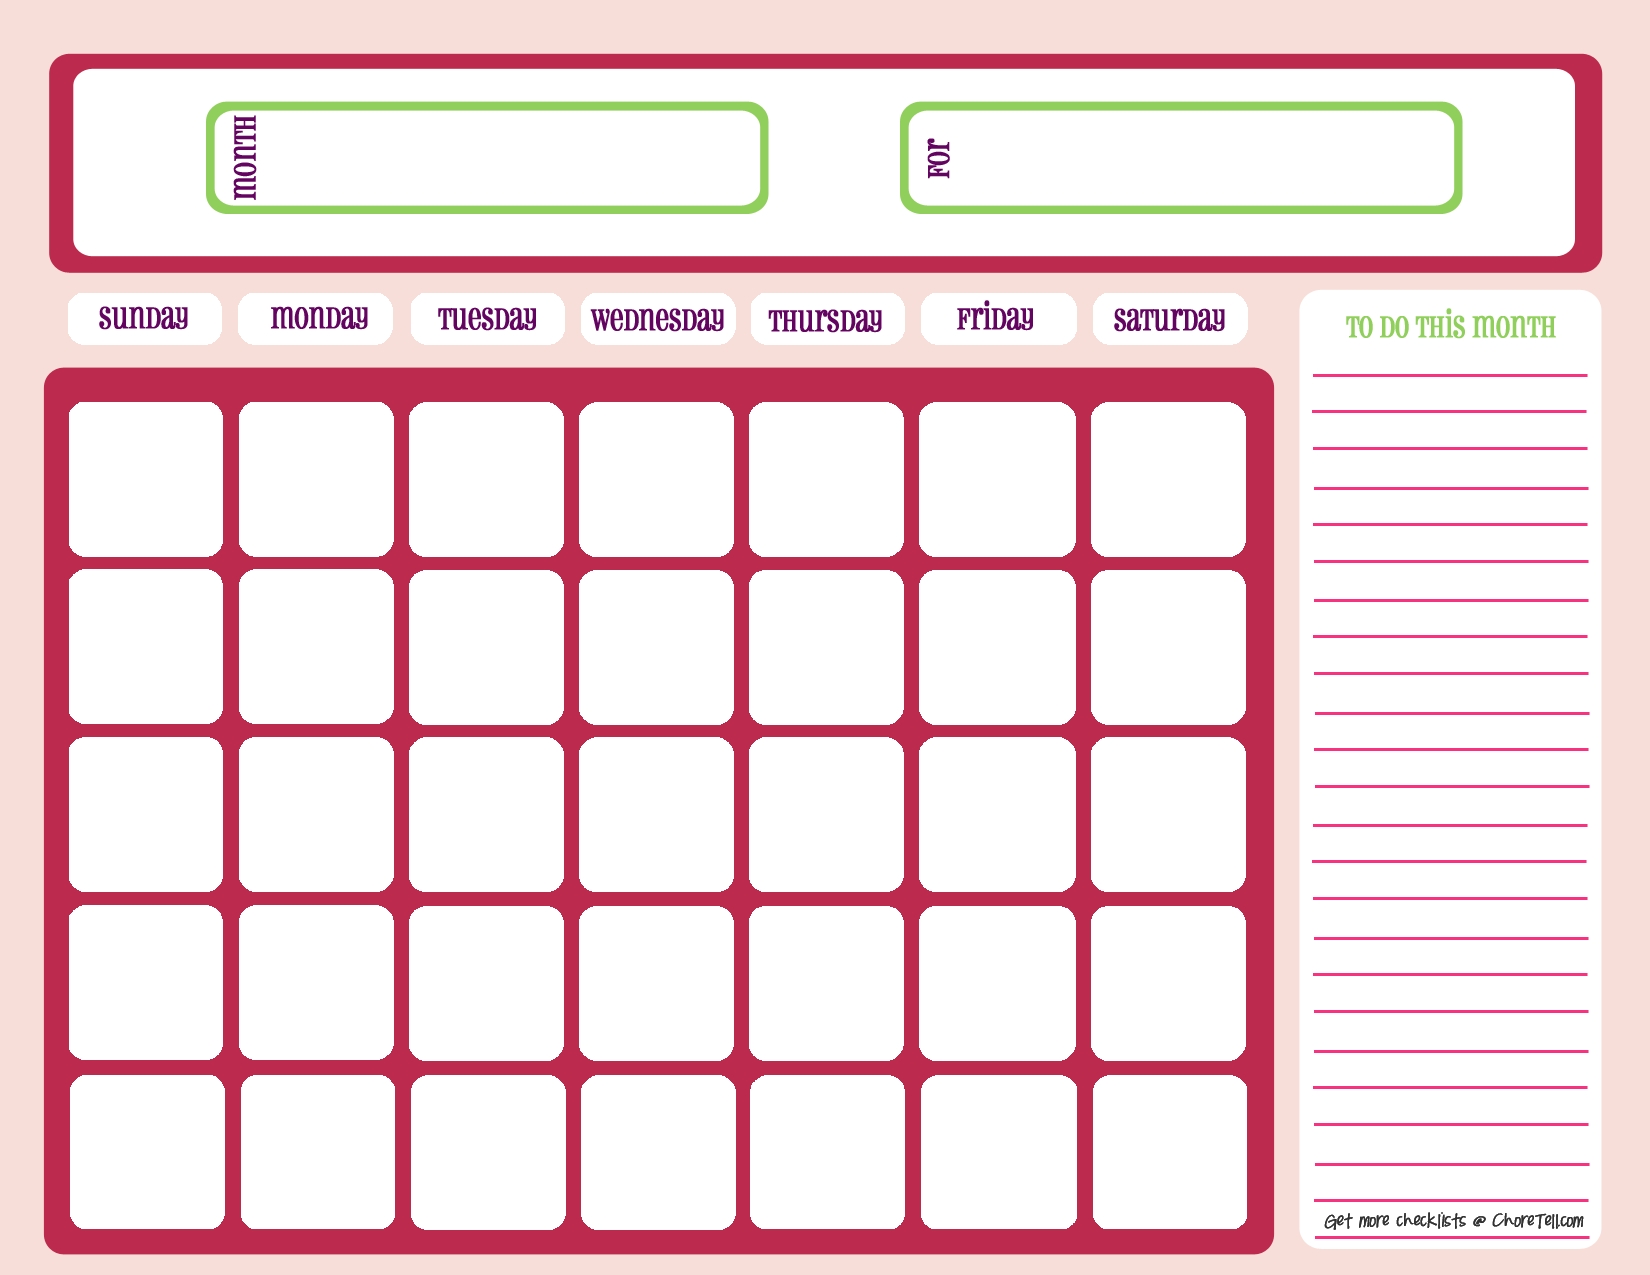 Blank Month Calendar - Pinks - Free Printable Downloads From Choretell within Blank Monthly Calendars To Print